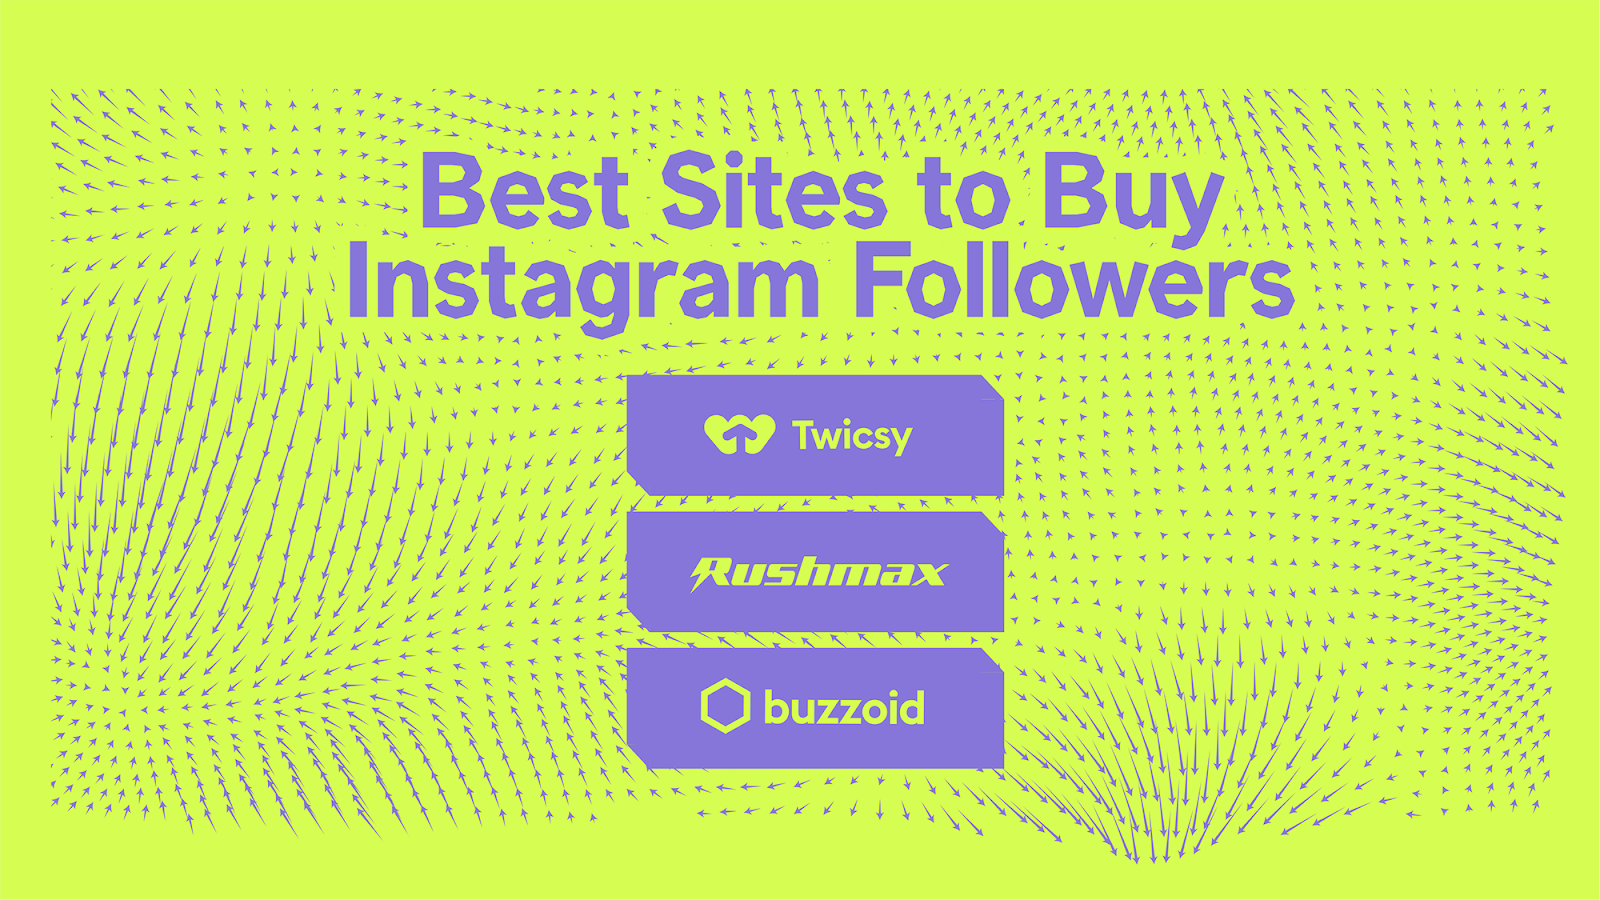 5 Best Sites To Buy Instagram Followers: The Top Picks 1